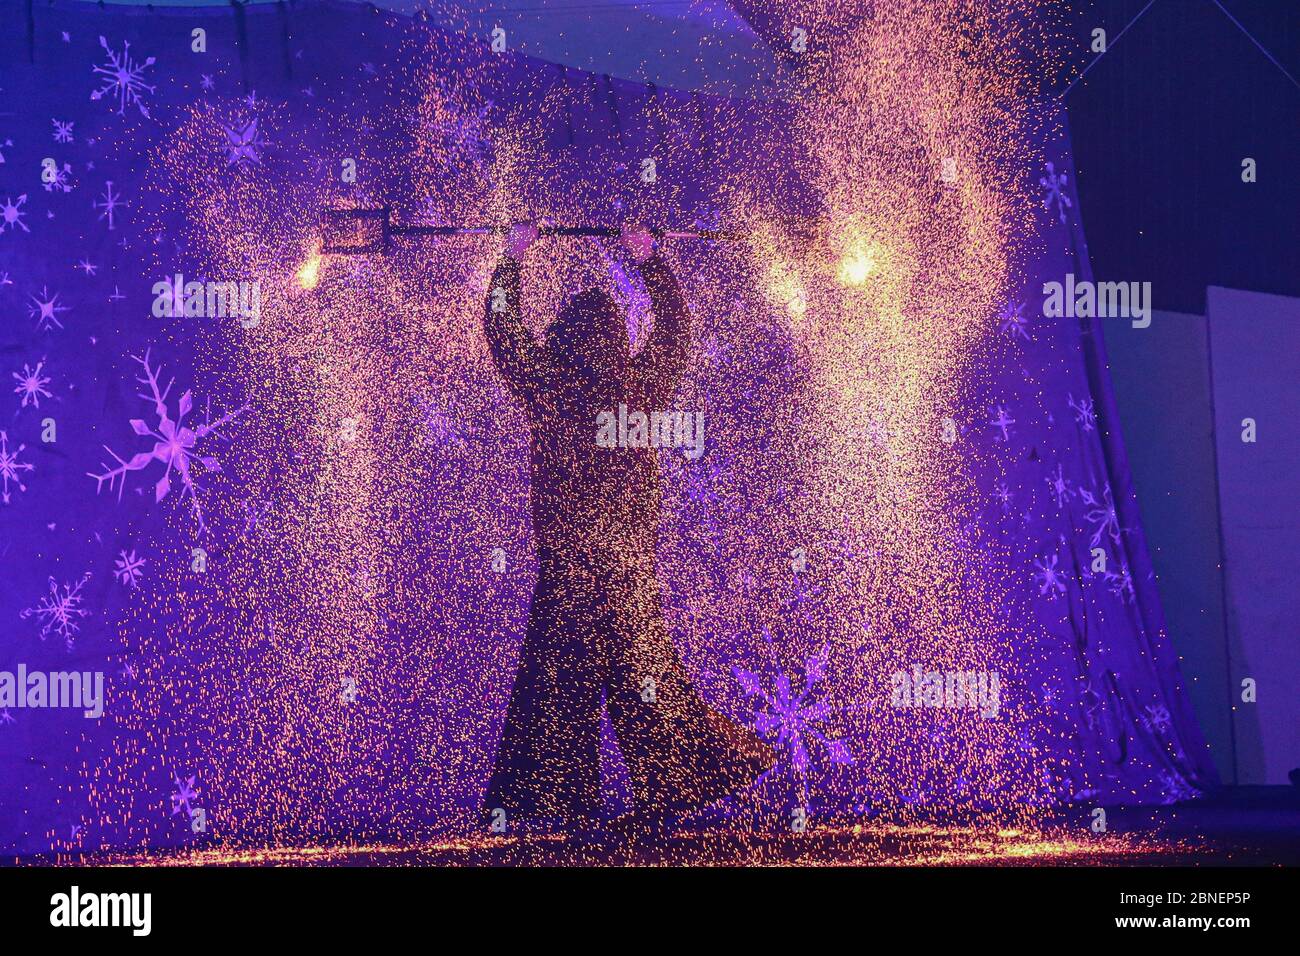 Amazing view of fire performer standing on a stage Stock Photo